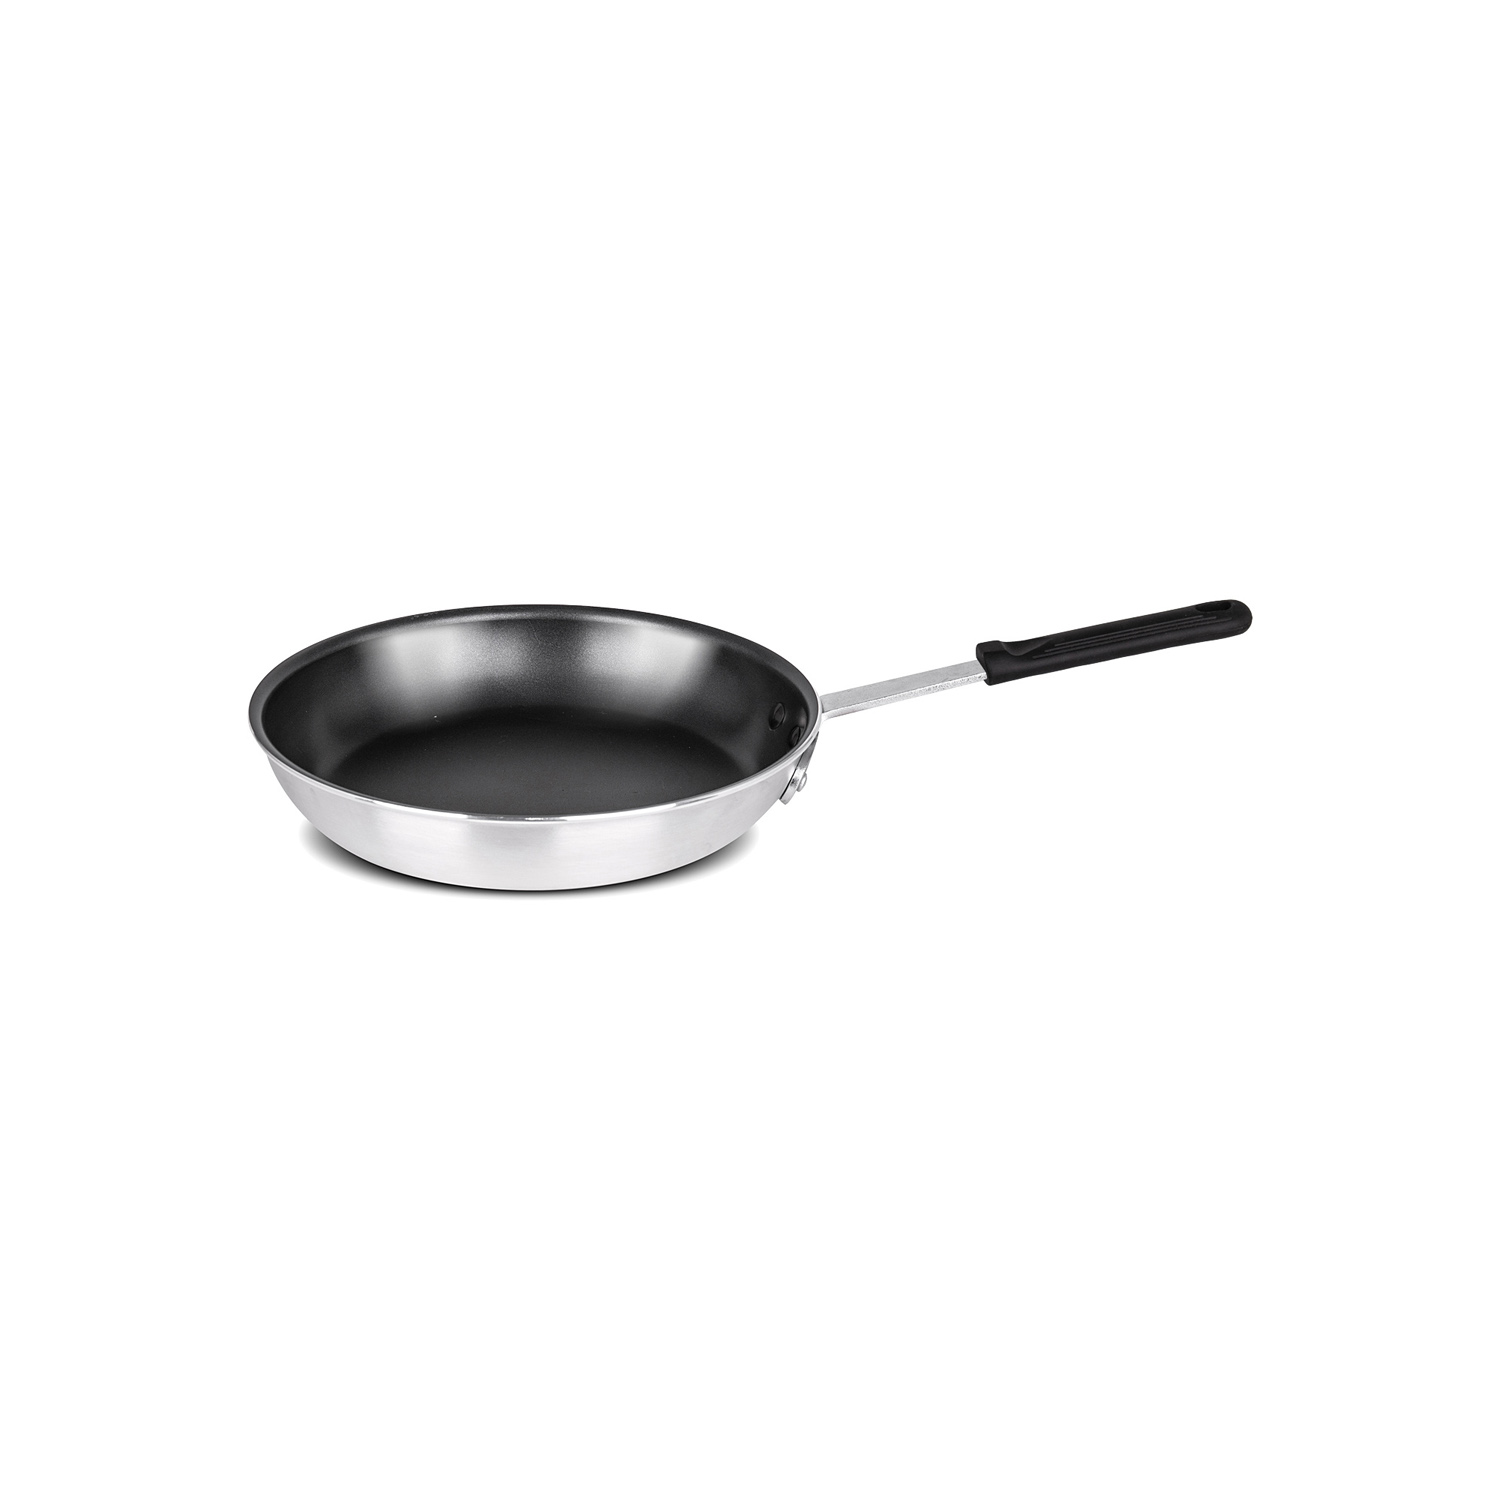 CAC China A4FP-12NL Non-Stick Aluminum Fry Pan with Sleeve 12"